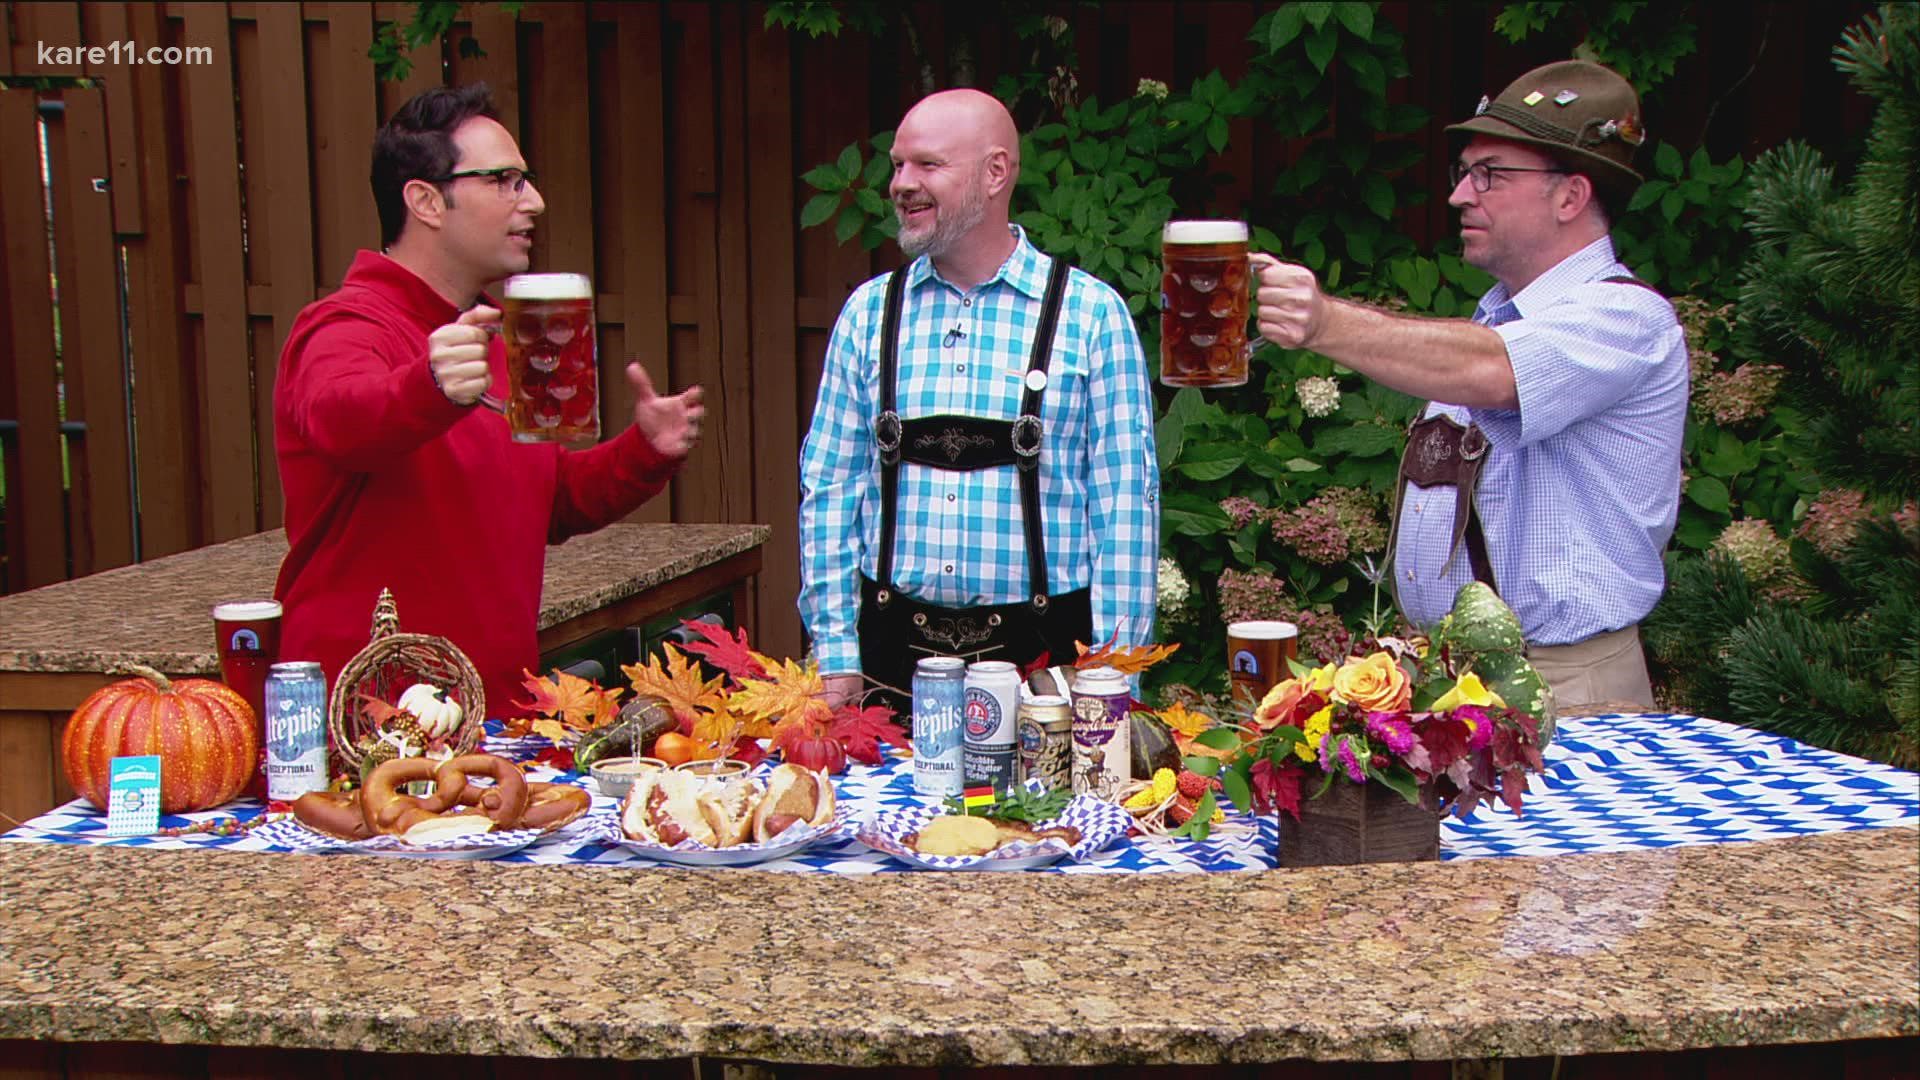 The 2021 Twin Cities Oktoberfest on Oct. 8 and 9 will feature beer, cider and wine from five Minnesota breweries, cideries and wineries.